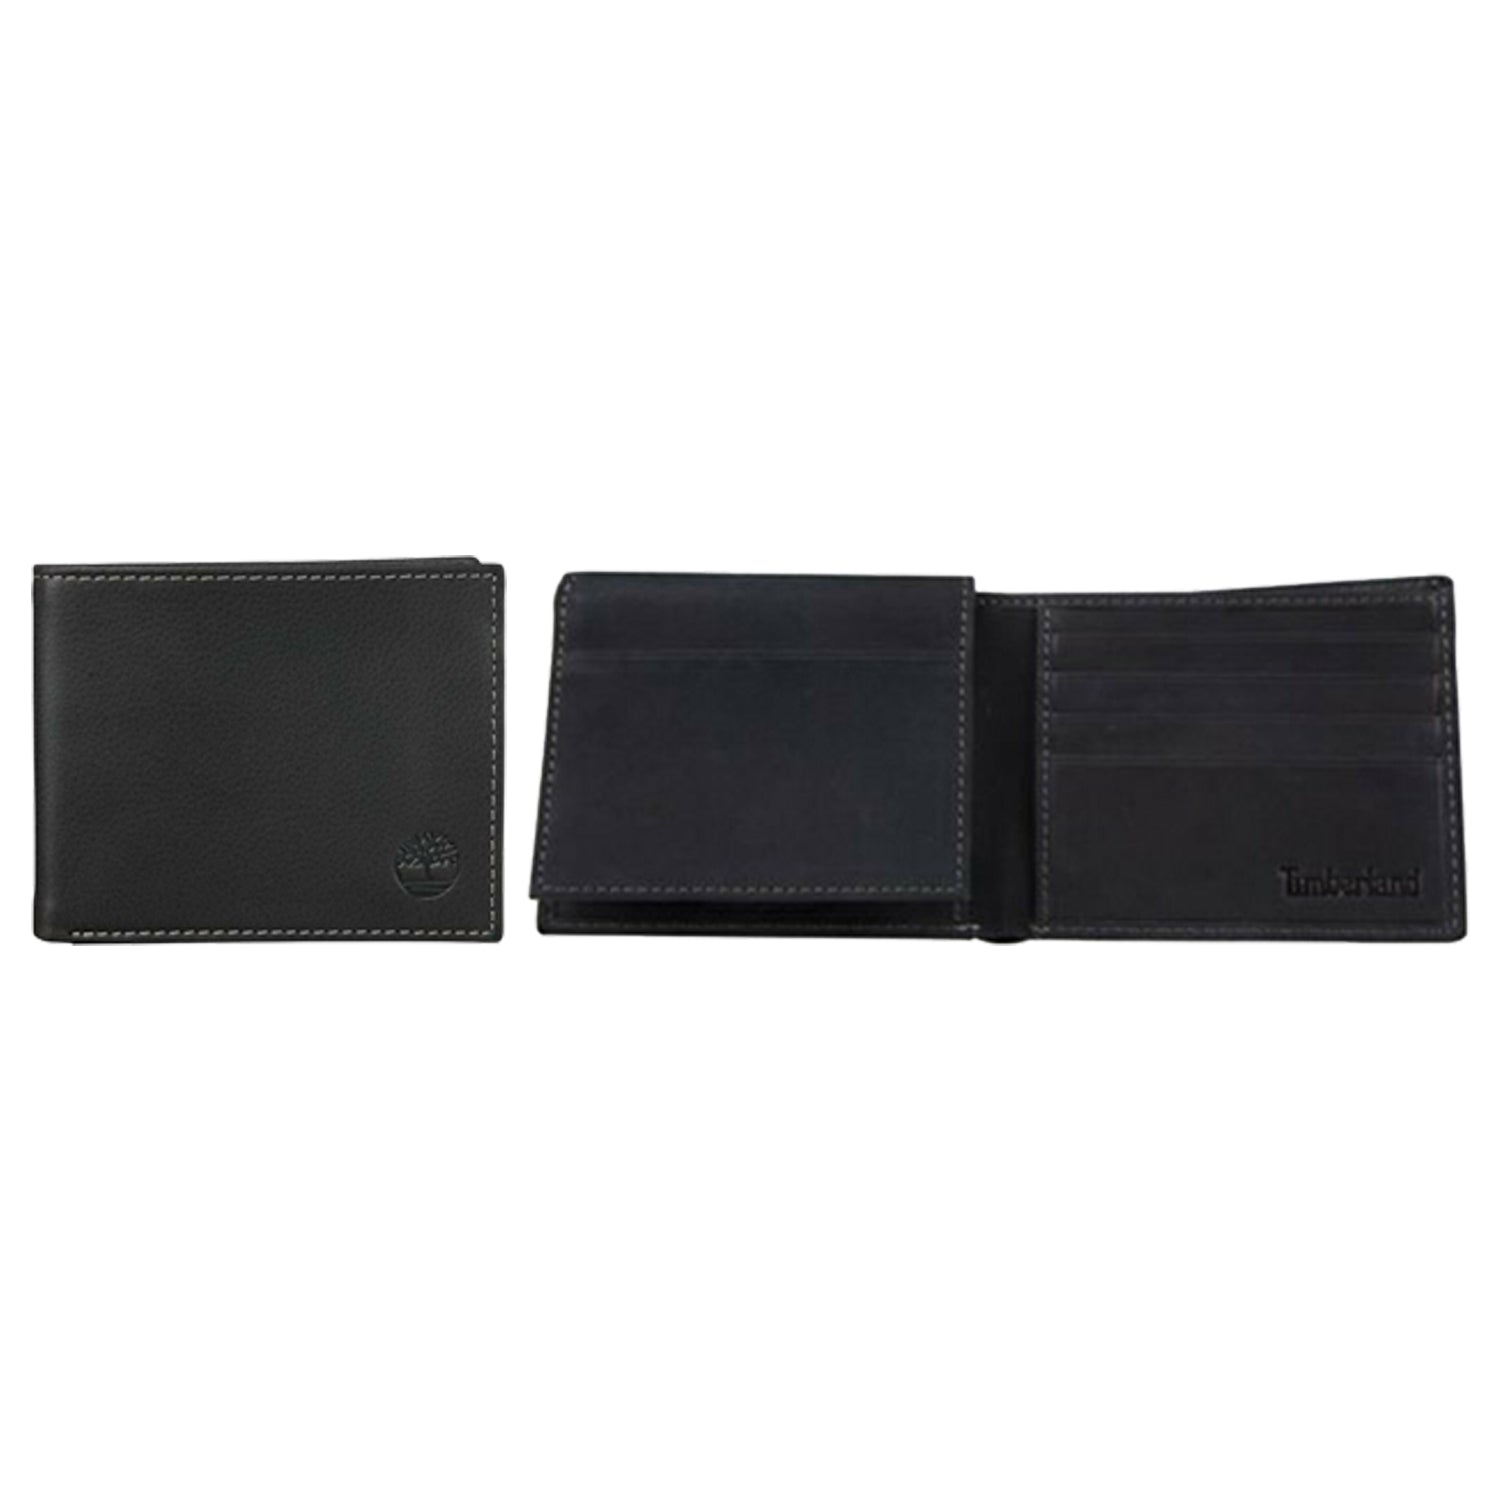 Timberland Leather Passcase Wallet Mens Style : D57387/08